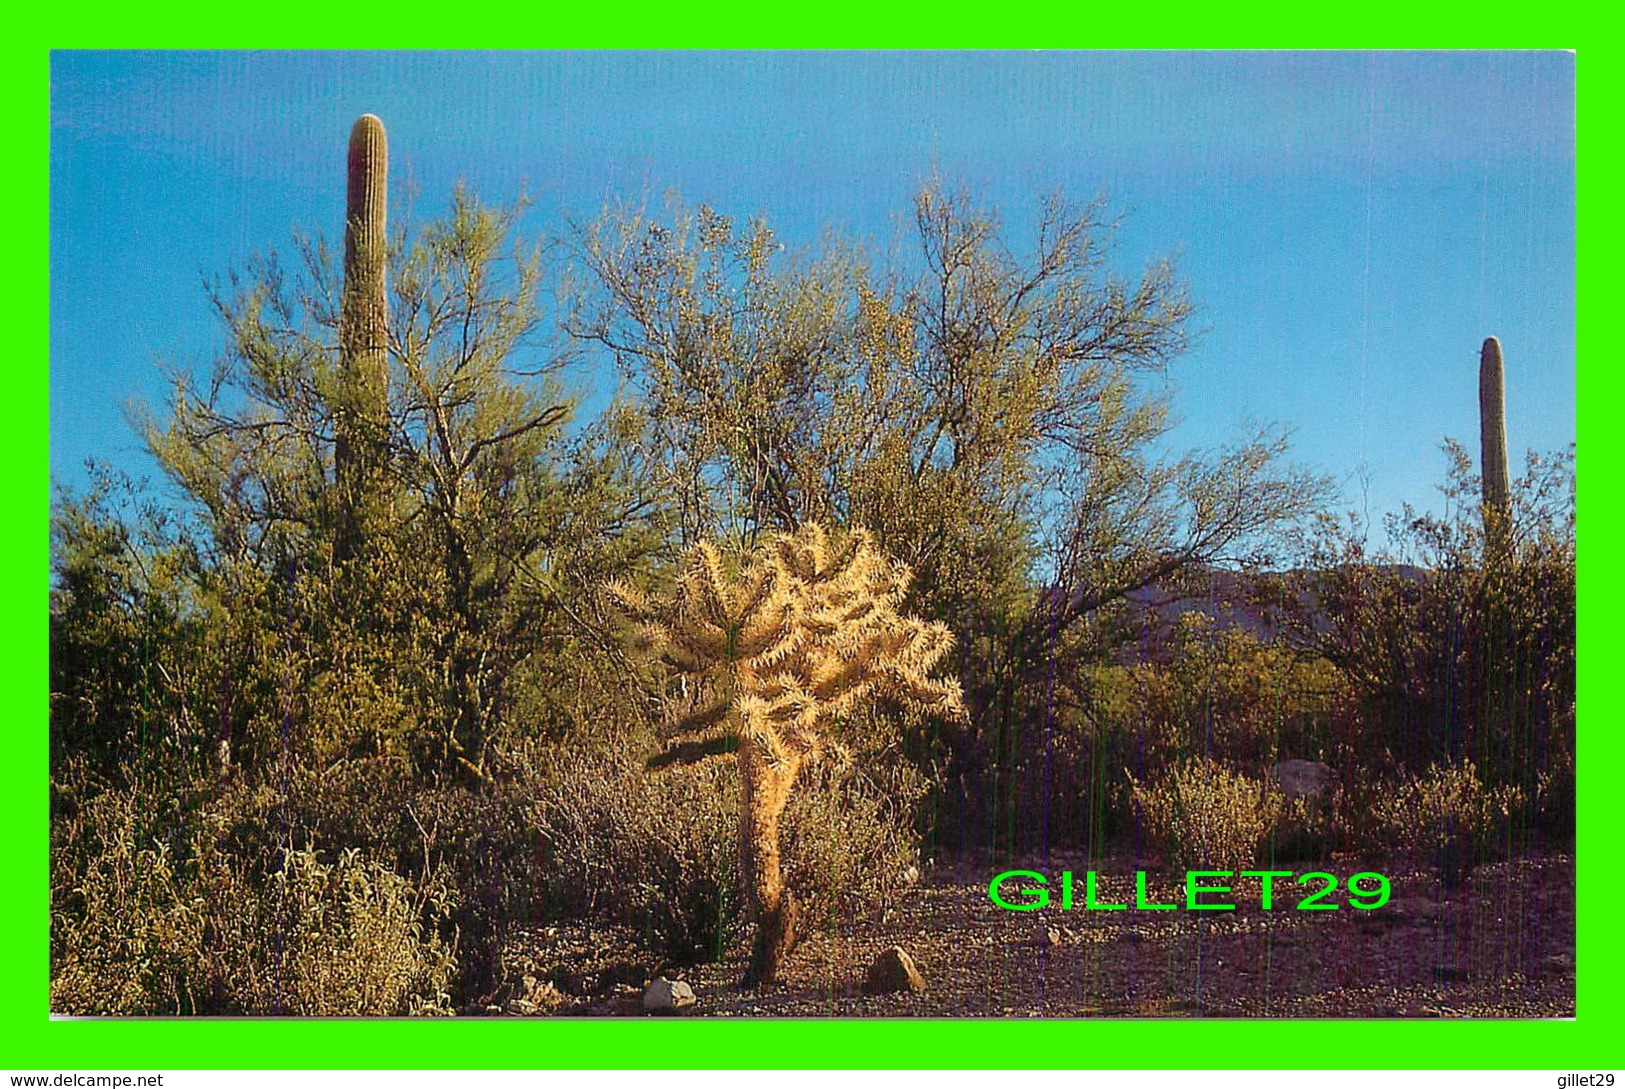 CACTUS - TEDDY BEAR CHOLLA ( JUMPING CACTUS ) - FREELANCE PRODUCTS CO - - Cactus